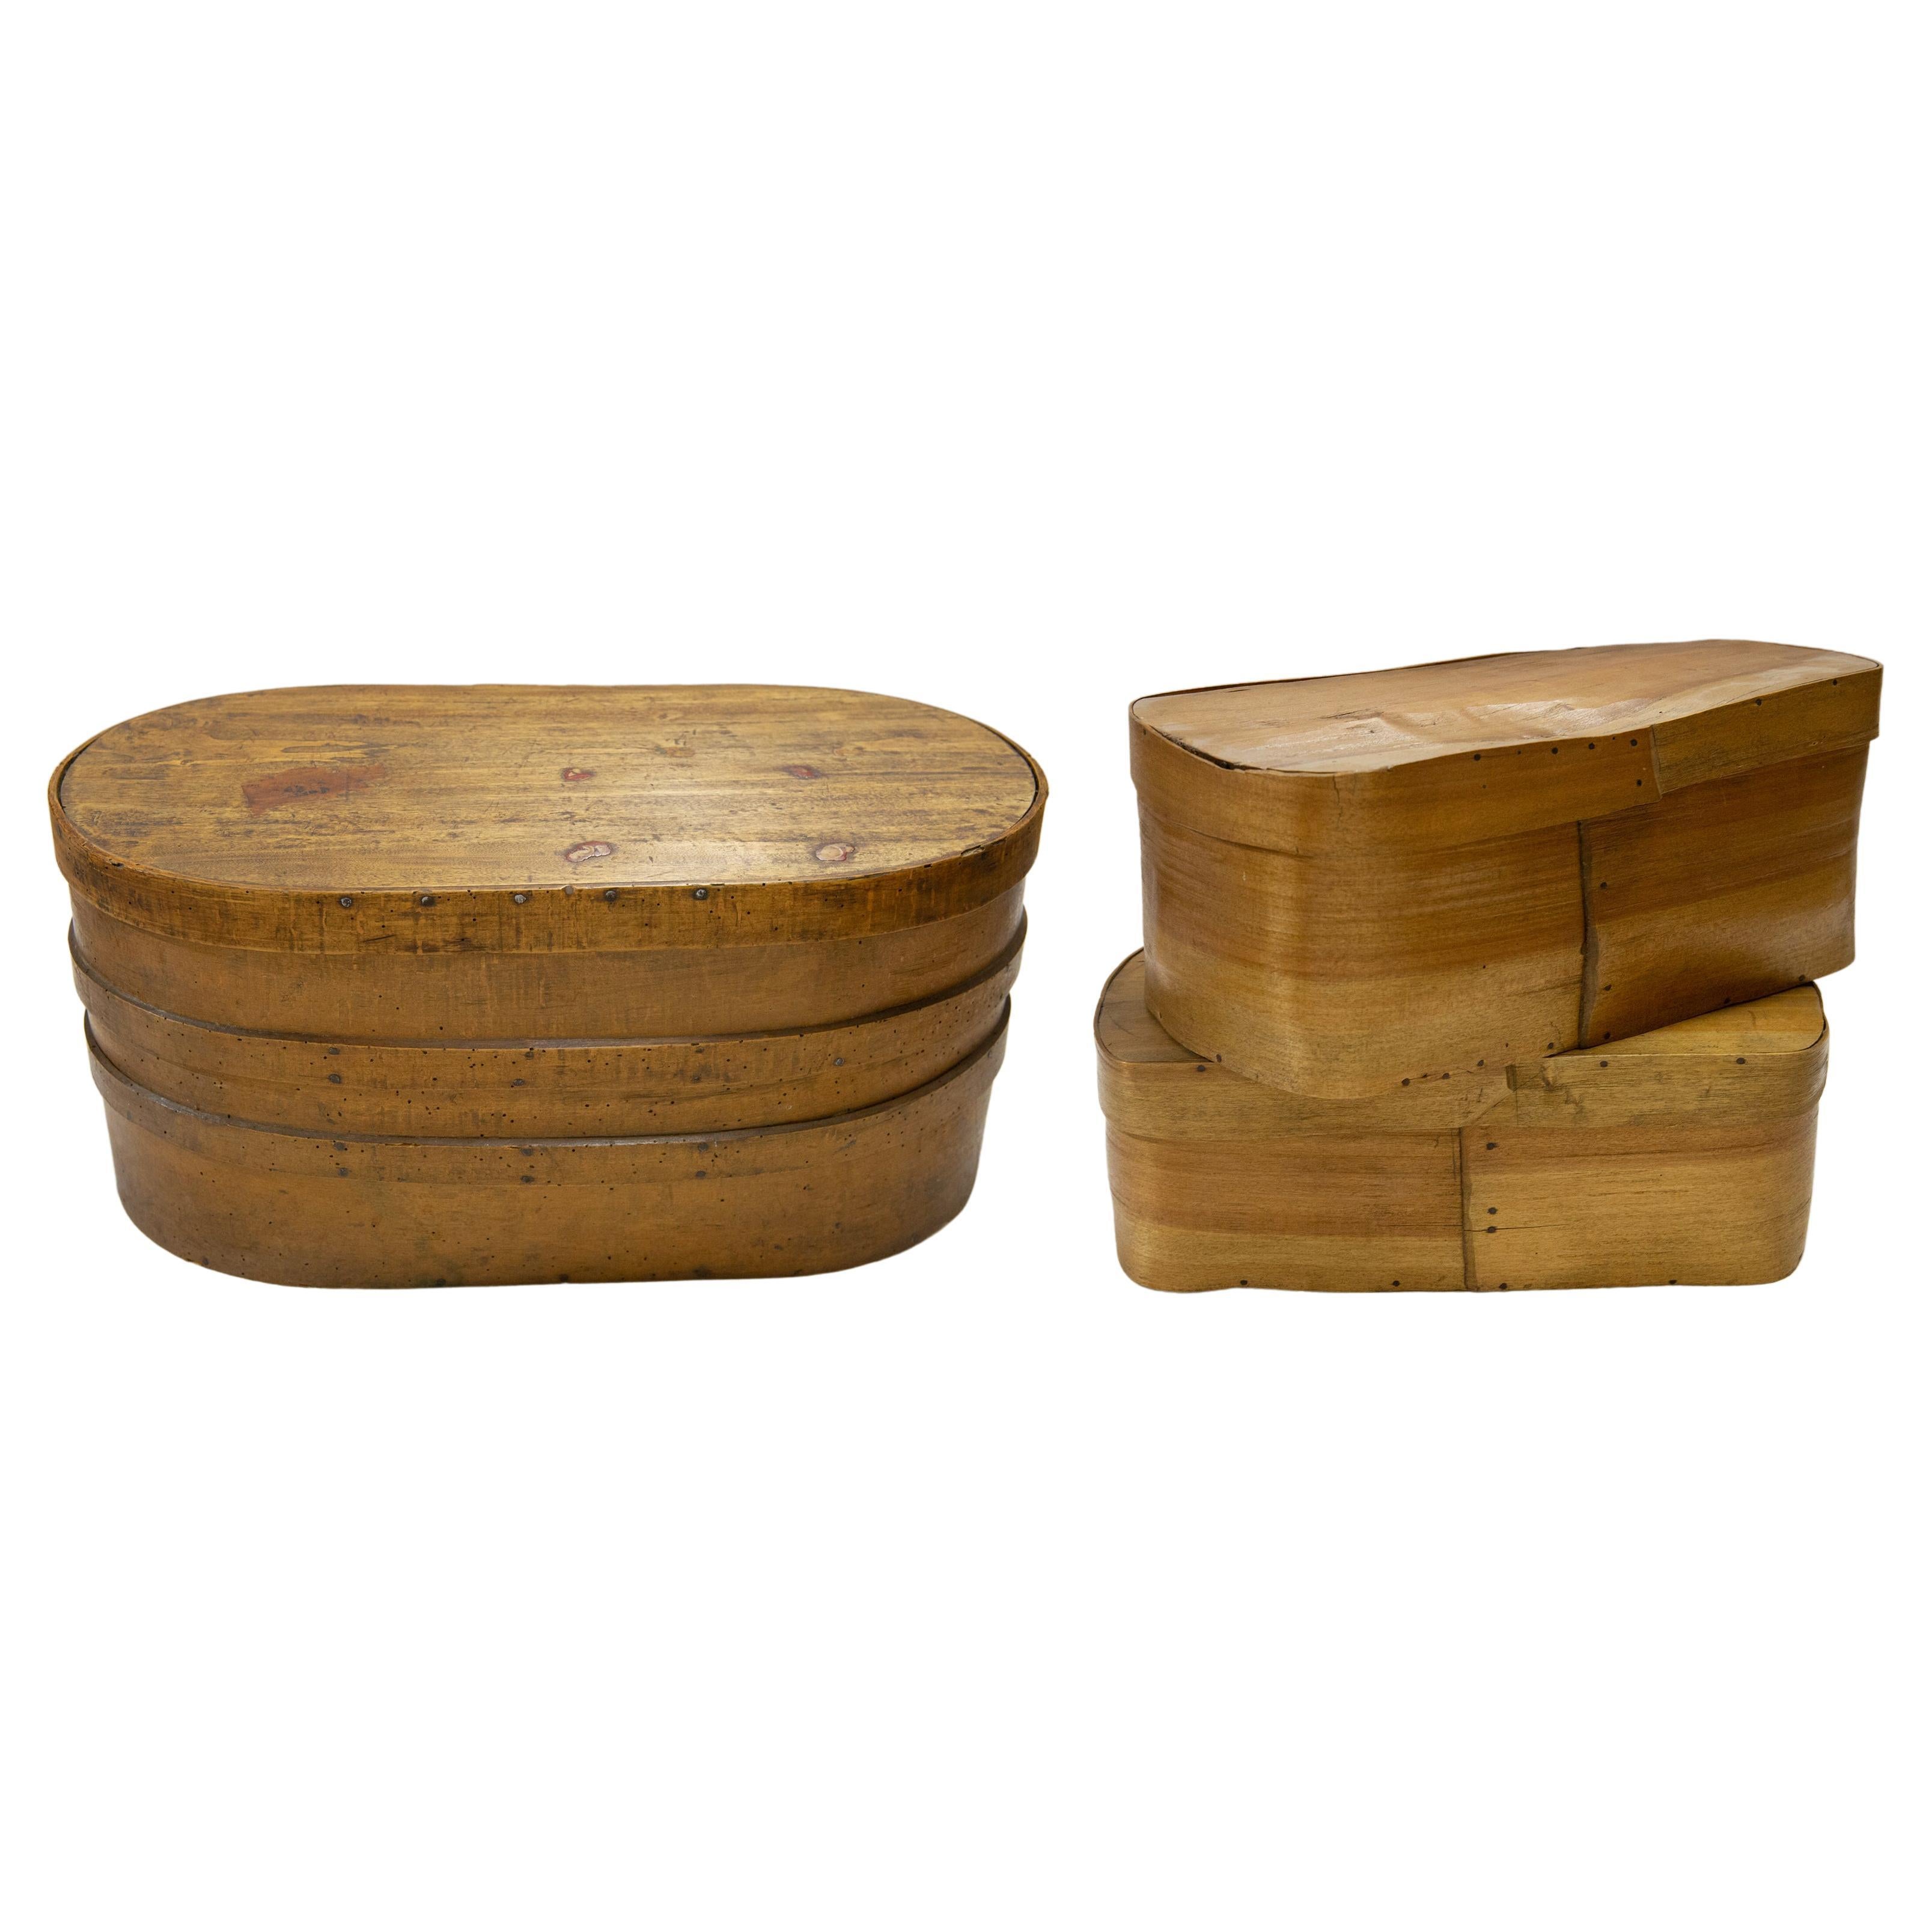 Oval Wooden Apothecary Boxes Set